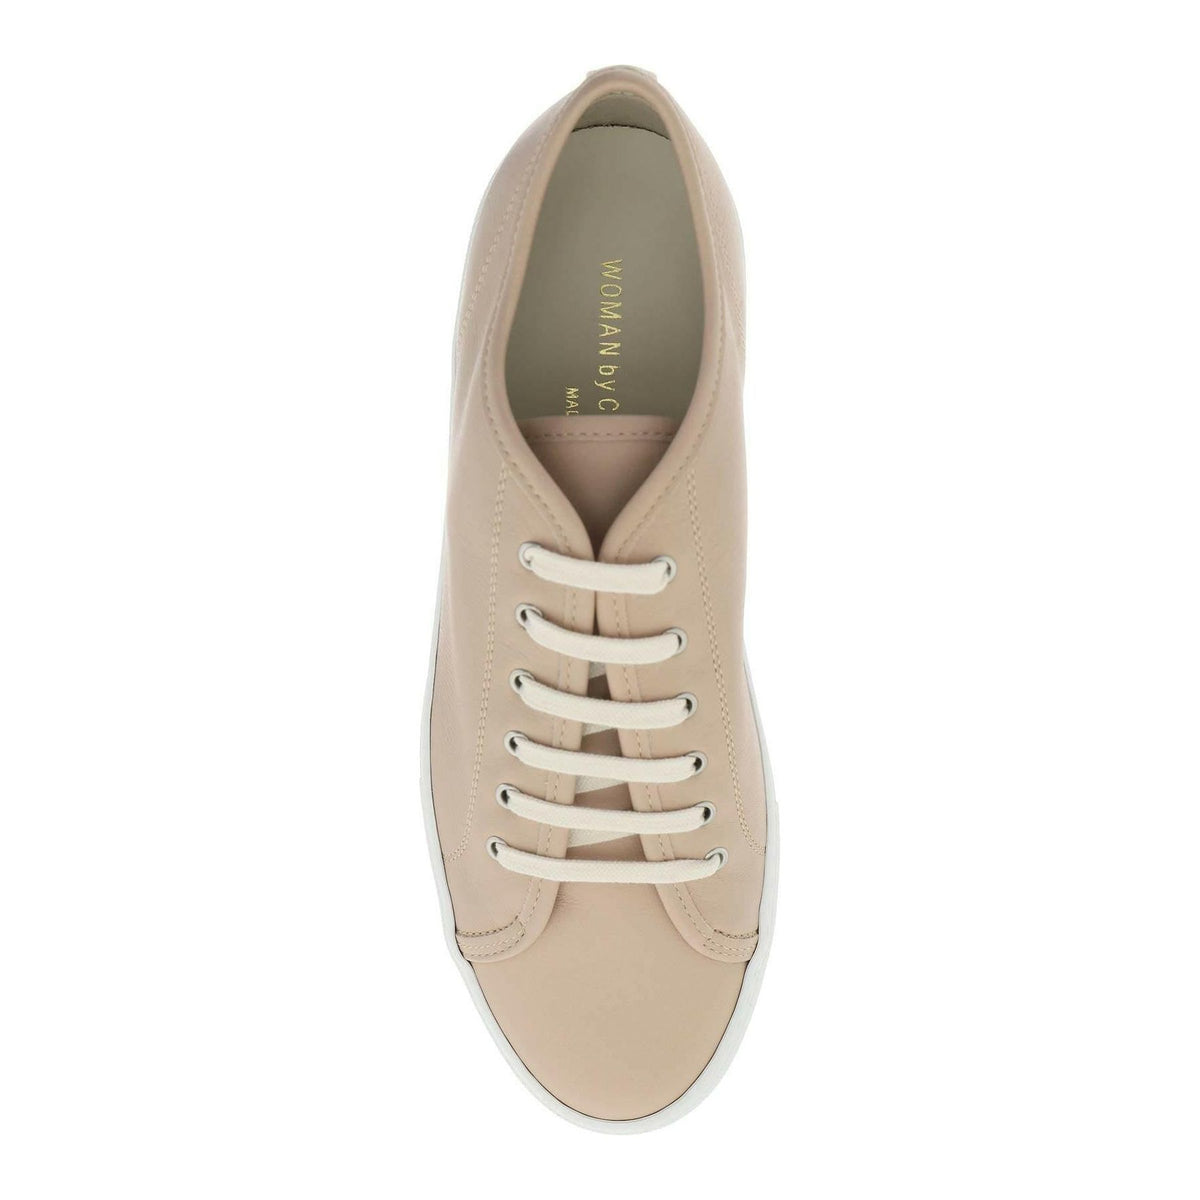 Leather Tournament Low Super Sneakers COMMON PROJECTS JOHN JULIA.